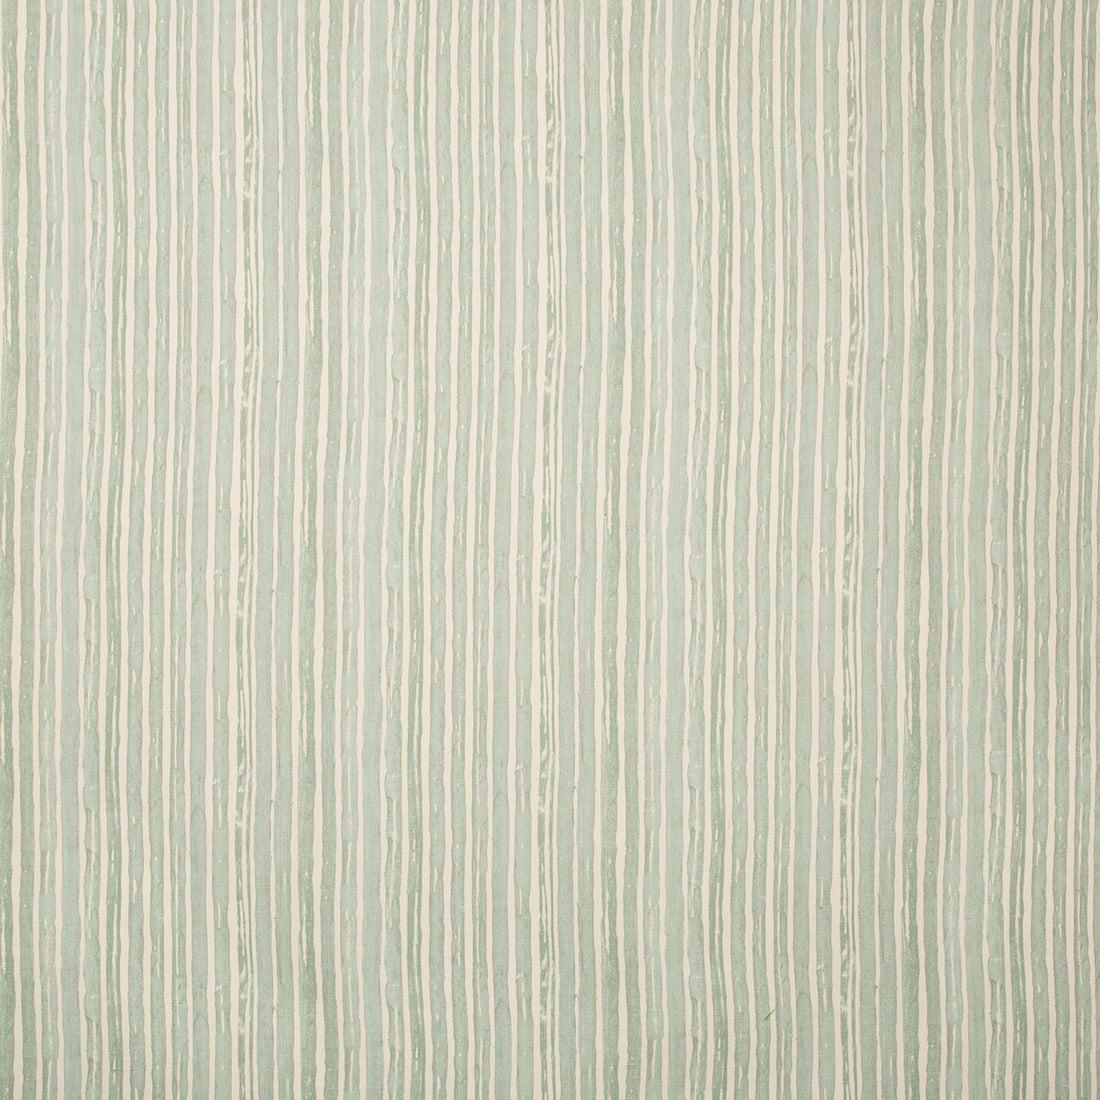 Benson Stripe fabric in lakeland color - pattern 2019151.13.0 - by Lee Jofa in the Carrier And Company collection